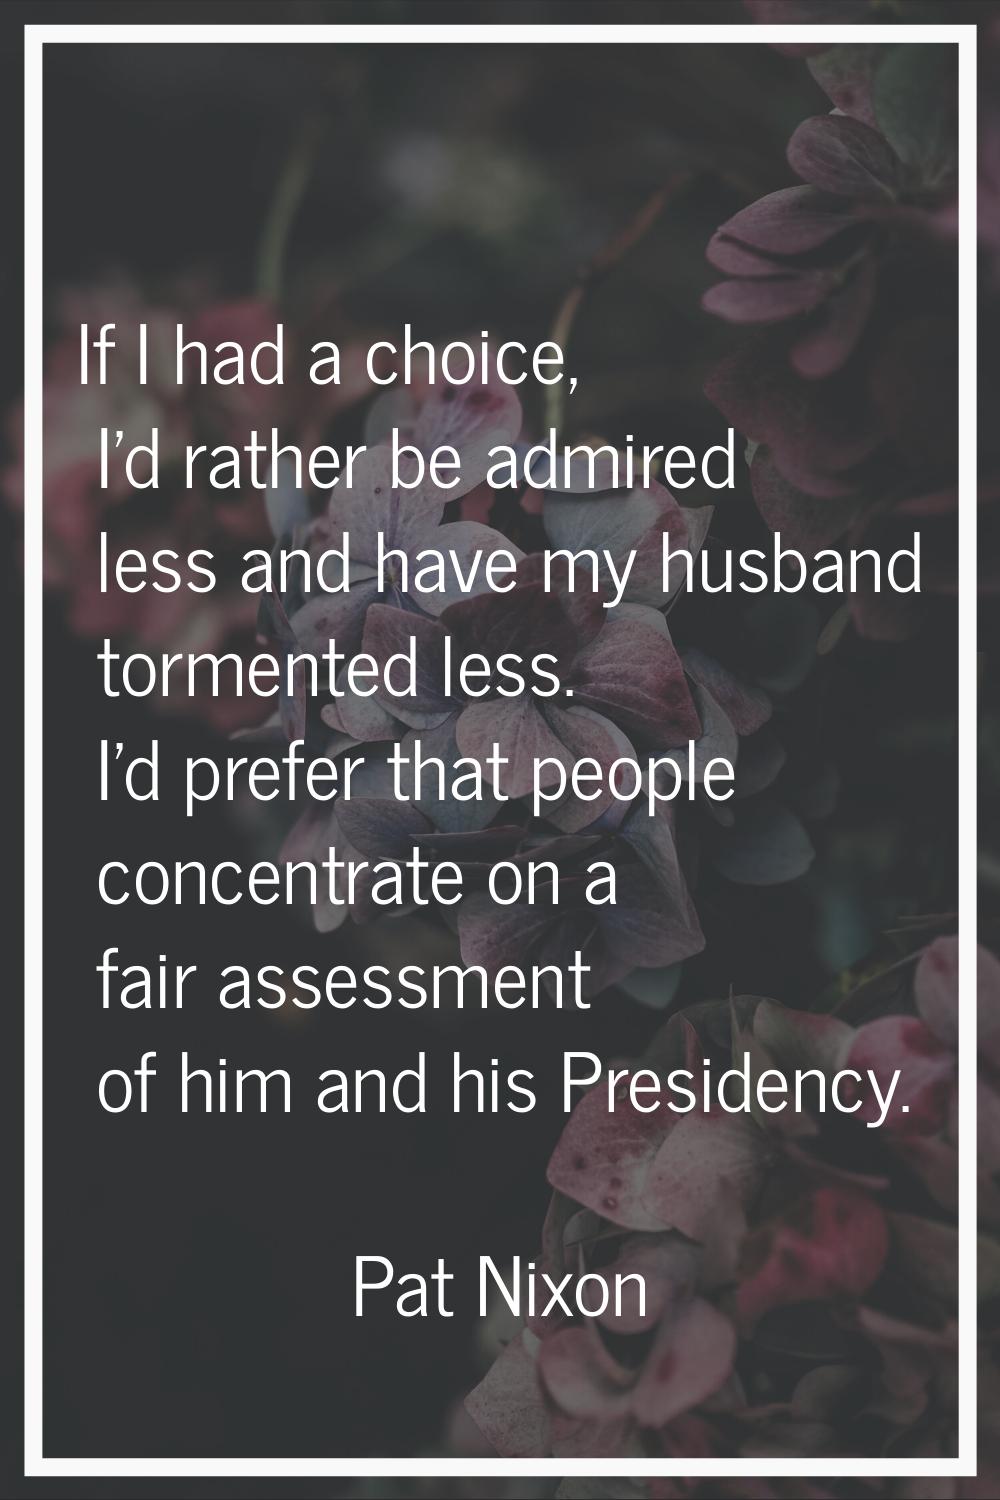 If I had a choice, I'd rather be admired less and have my husband tormented less. I'd prefer that p